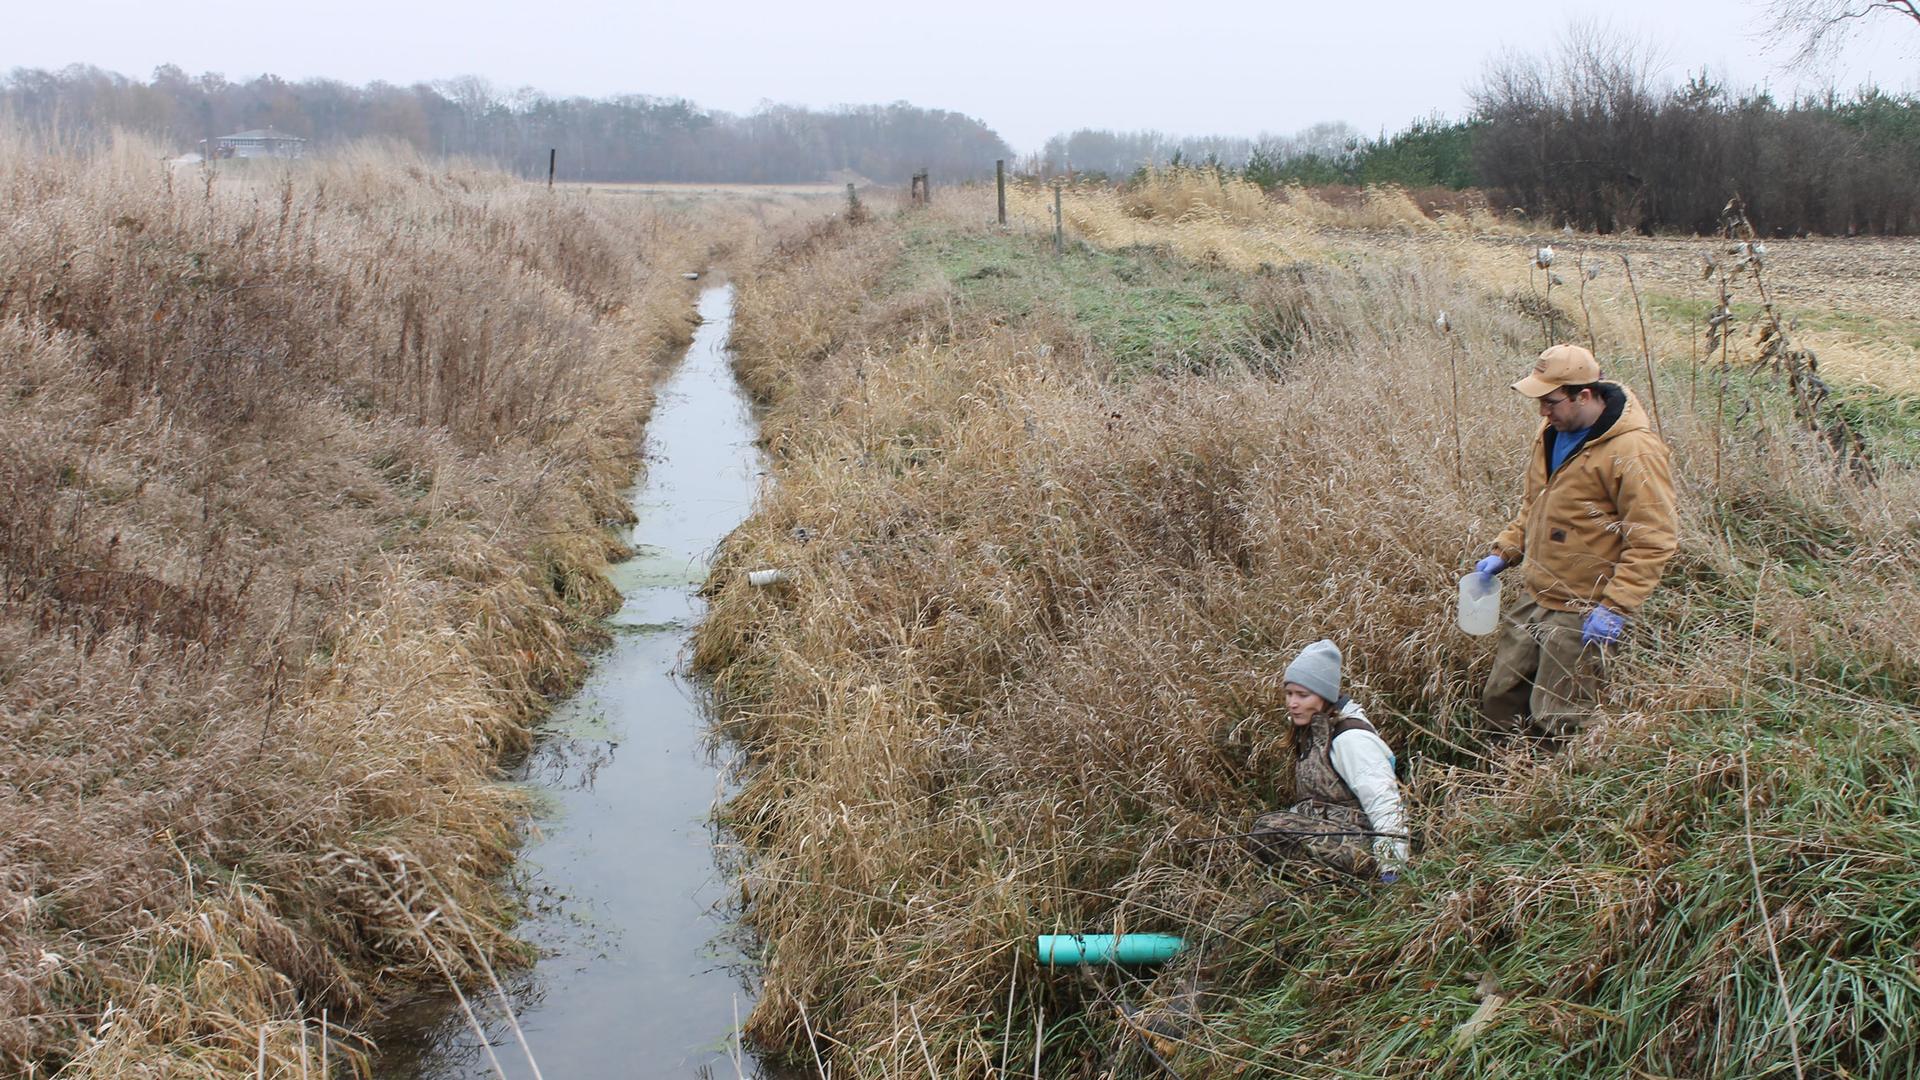 Two people are shown next to a water-filled ditch with a grassy field on either side.